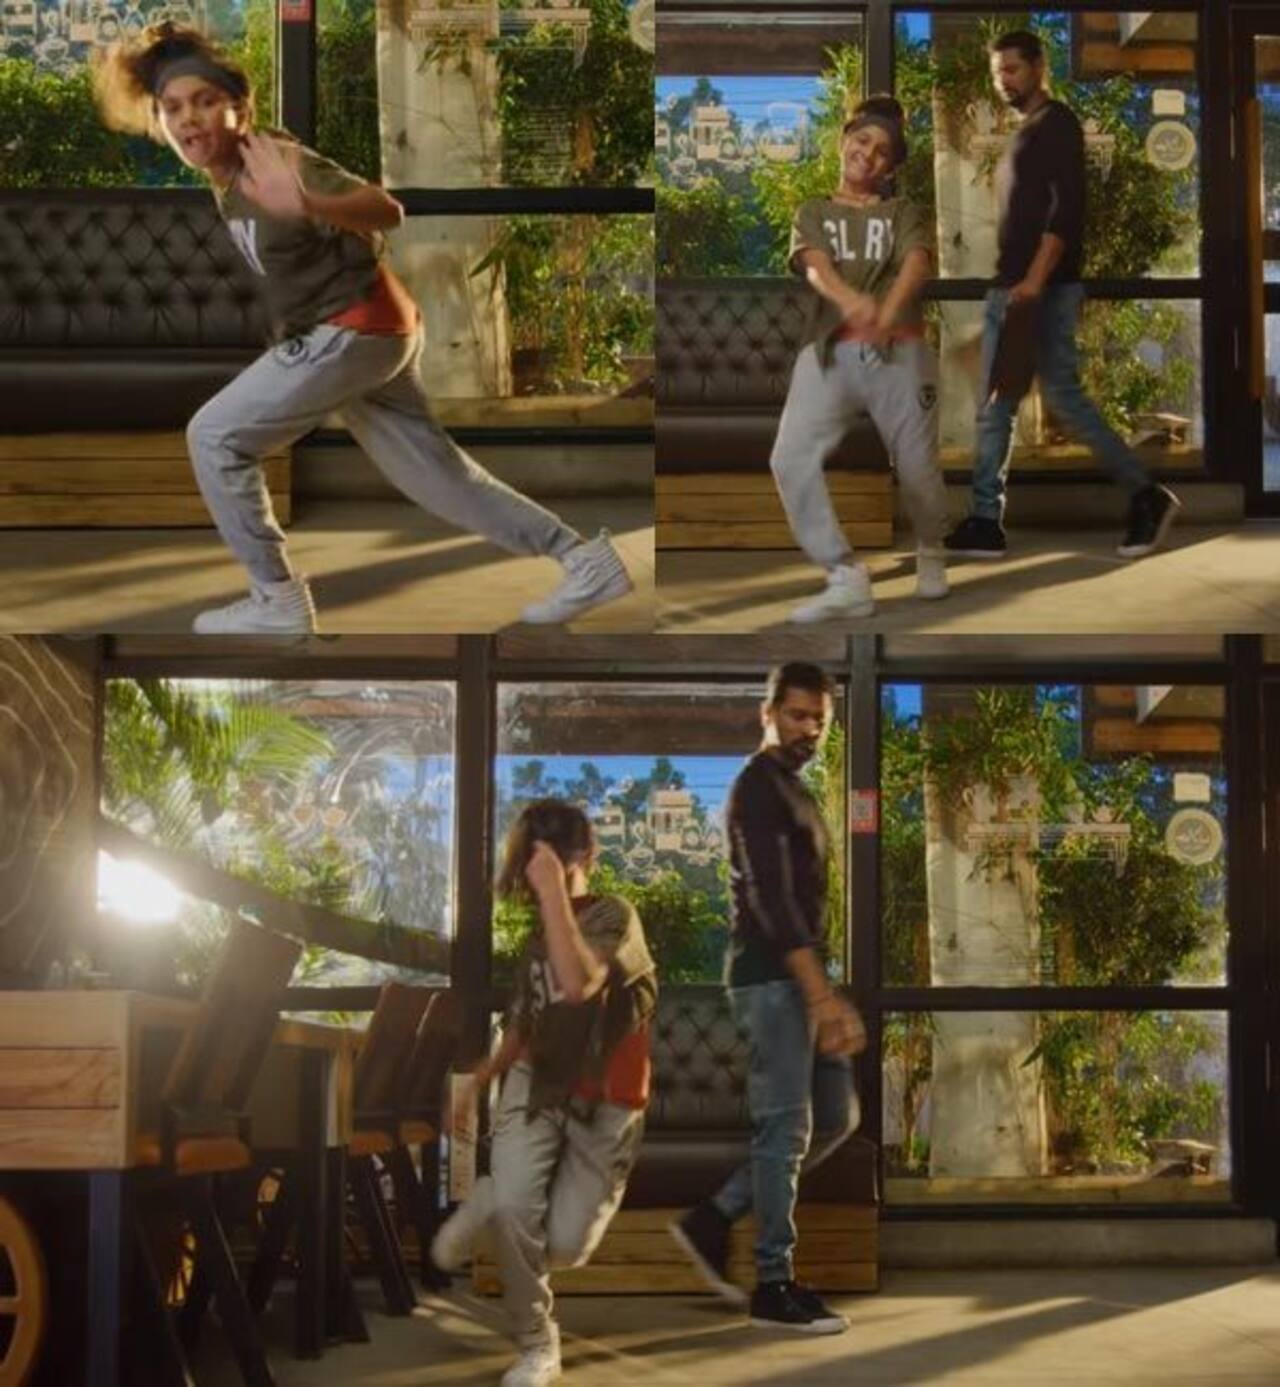 Lakshmi teaser: After Prabhudheva, his extra-ordinary student Ditya Bhande shows her killer moves in this dance film - watch video